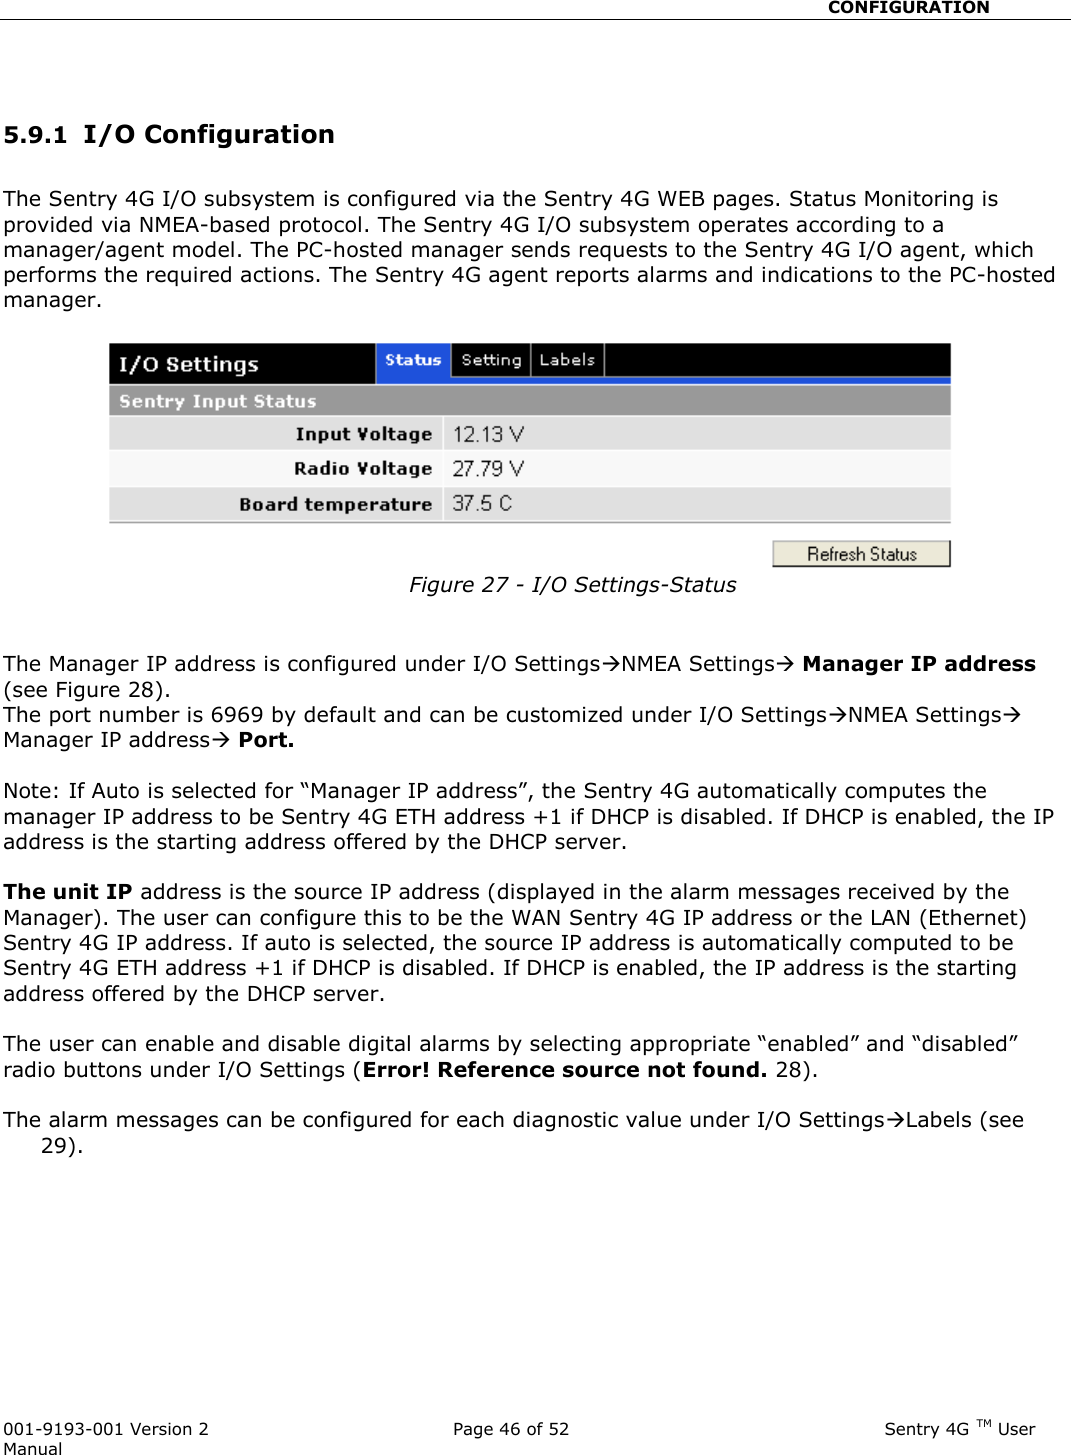                                                       CONFIGURATION  001-9193-001 Version 2              Page 46 of 52                              Sentry 4G TM User Manual   5.9.1  I/O Configuration  The Sentry 4G I/O subsystem is configured via the Sentry 4G WEB pages. Status Monitoring is provided via NMEA-based protocol. The Sentry 4G I/O subsystem operates according to a manager/agent model. The PC-hosted manager sends requests to the Sentry 4G I/O agent, which performs the required actions. The Sentry 4G agent reports alarms and indications to the PC-hosted manager.  Figure 27 - I/O Settings-Status   The Manager IP address is configured under I/O SettingsNMEA Settings Manager IP address (see Figure 28).  The port number is 6969 by default and can be customized under I/O SettingsNMEA Settings Manager IP address Port.  Note: If Auto is selected for “Manager IP address”, the Sentry 4G automatically computes the manager IP address to be Sentry 4G ETH address +1 if DHCP is disabled. If DHCP is enabled, the IP address is the starting address offered by the DHCP server.   The unit IP address is the source IP address (displayed in the alarm messages received by the Manager). The user can configure this to be the WAN Sentry 4G IP address or the LAN (Ethernet) Sentry 4G IP address. If auto is selected, the source IP address is automatically computed to be Sentry 4G ETH address +1 if DHCP is disabled. If DHCP is enabled, the IP address is the starting address offered by the DHCP server.  The user can enable and disable digital alarms by selecting appropriate “enabled” and “disabled” radio buttons under I/O Settings (Error! Reference source not found. 28).  The alarm messages can be configured for each diagnostic value under I/O SettingsLabels (see  29). 